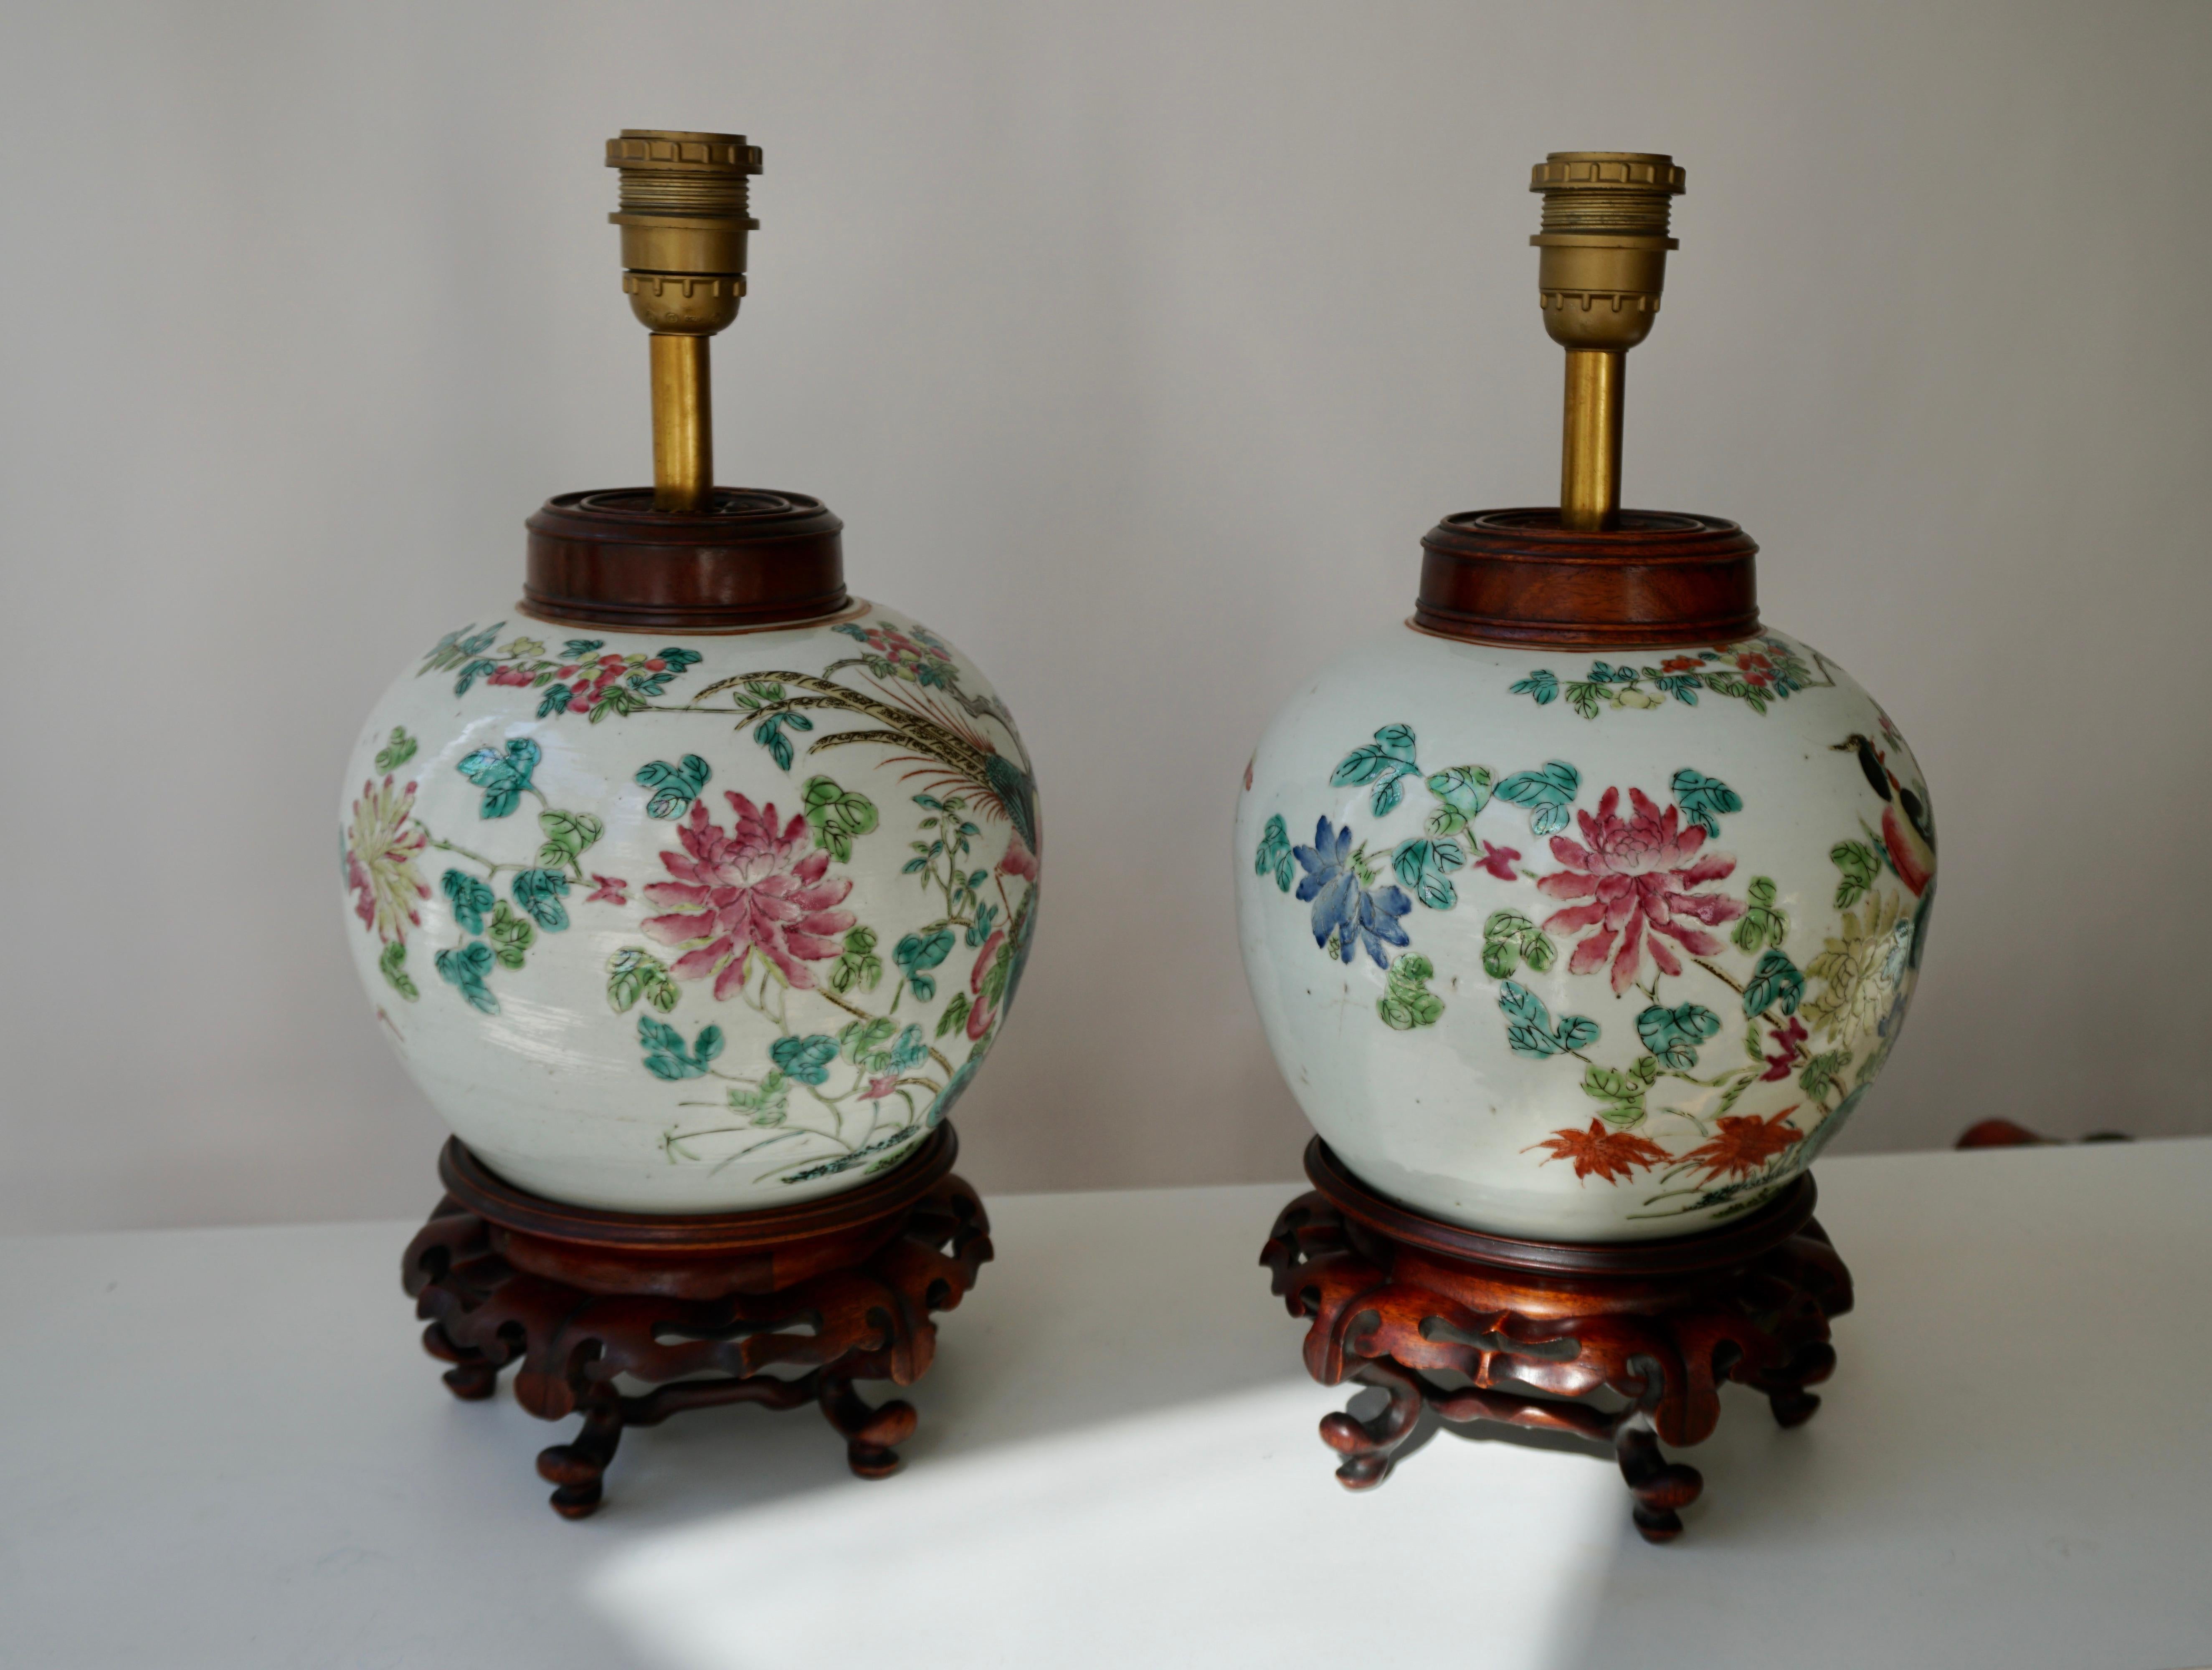 Pair of Chinese Export Porcelain Painted Ginger Jar Table Lamps with Birds 1